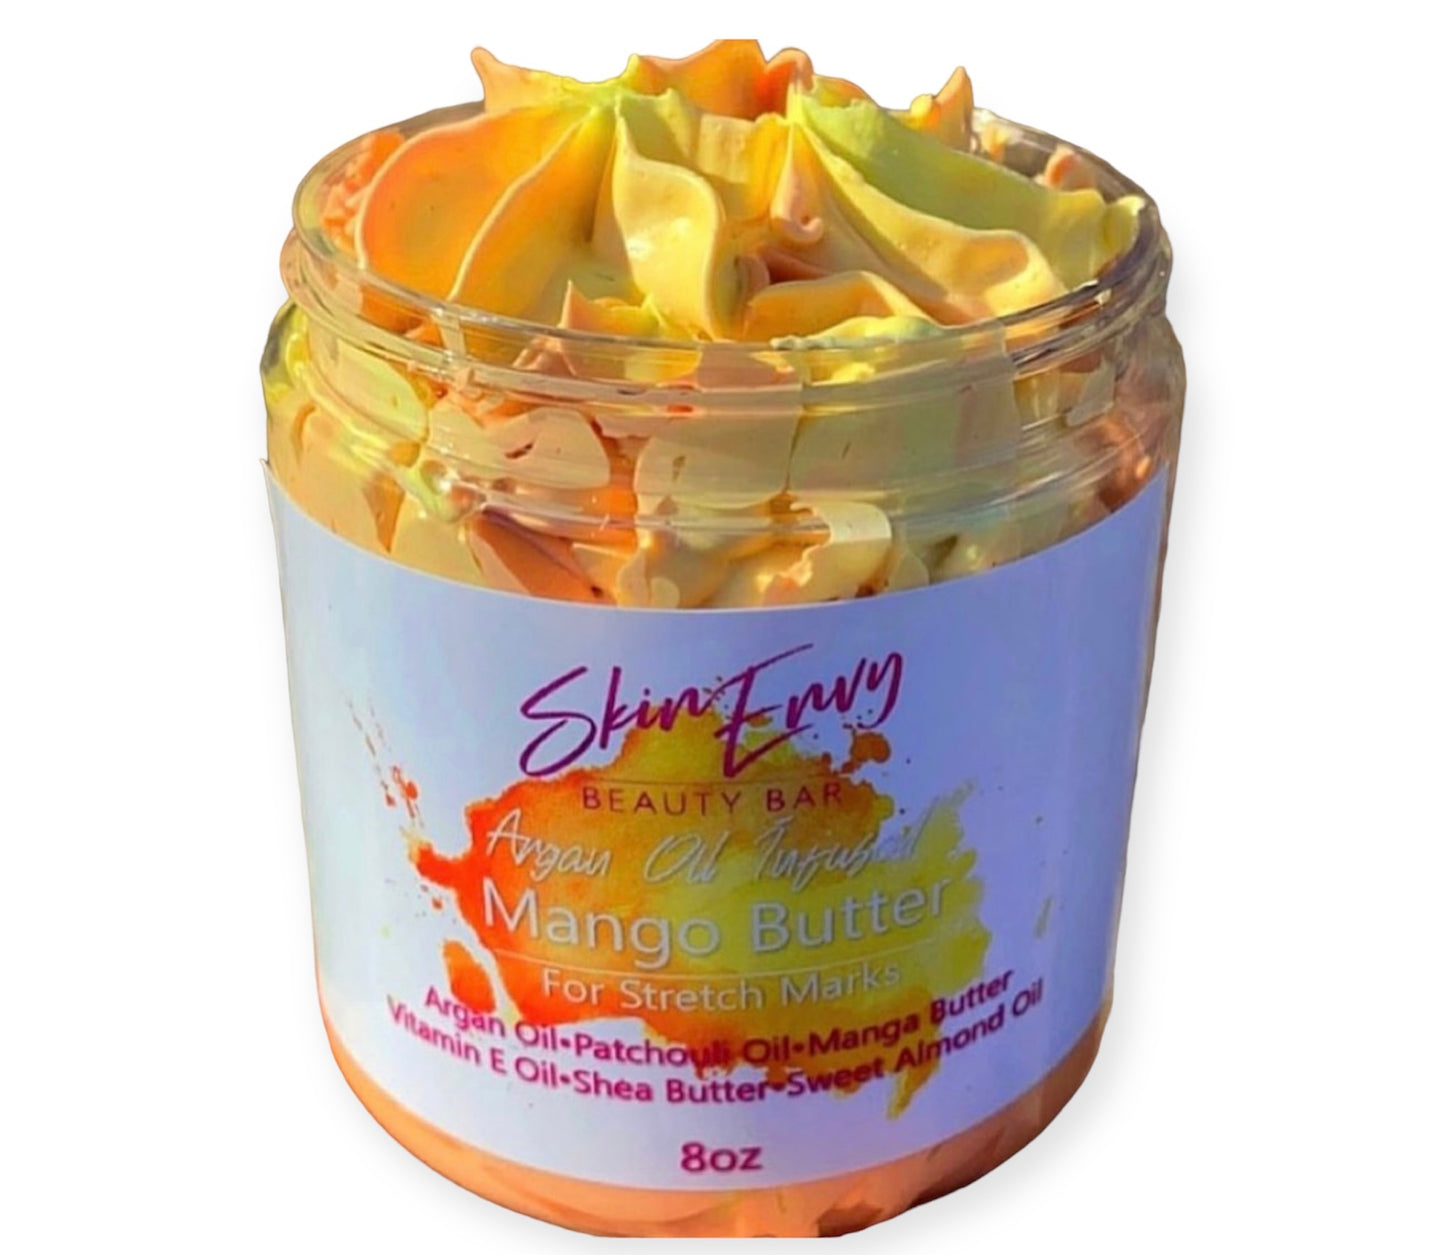 Mango Seed Infused Body Butter